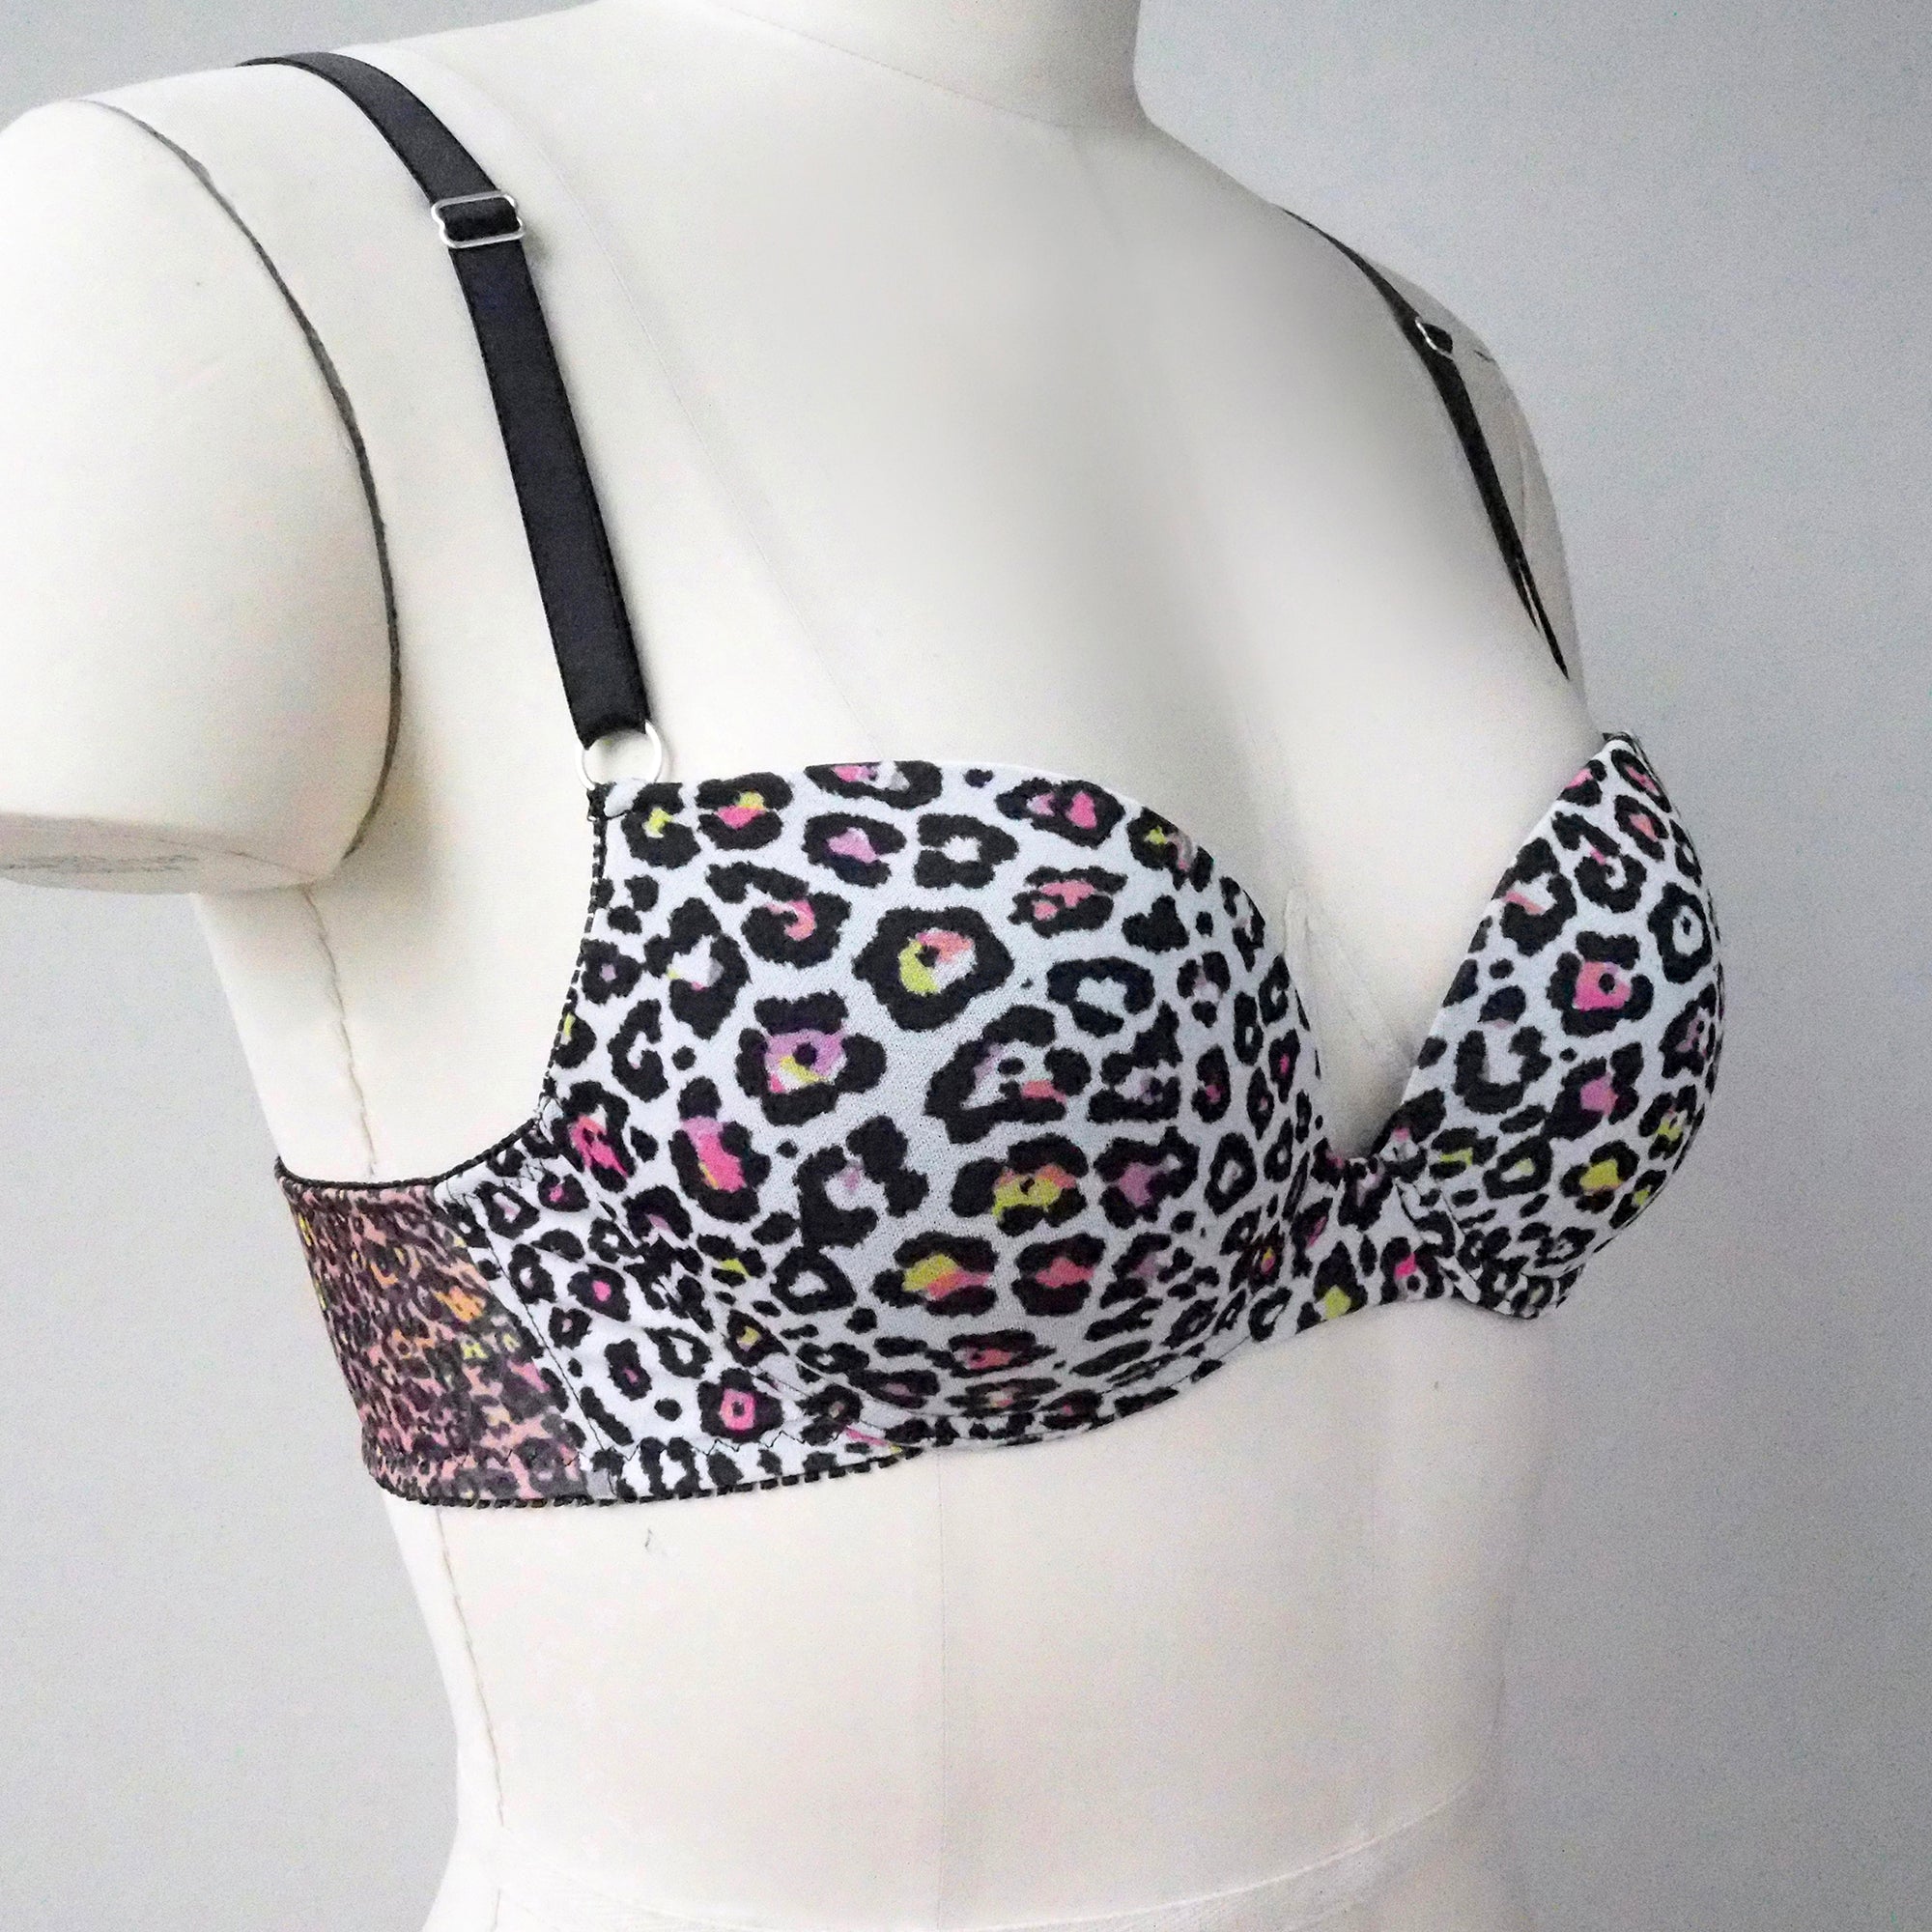 Introducing the Mystic Bra Sewing Pattern!